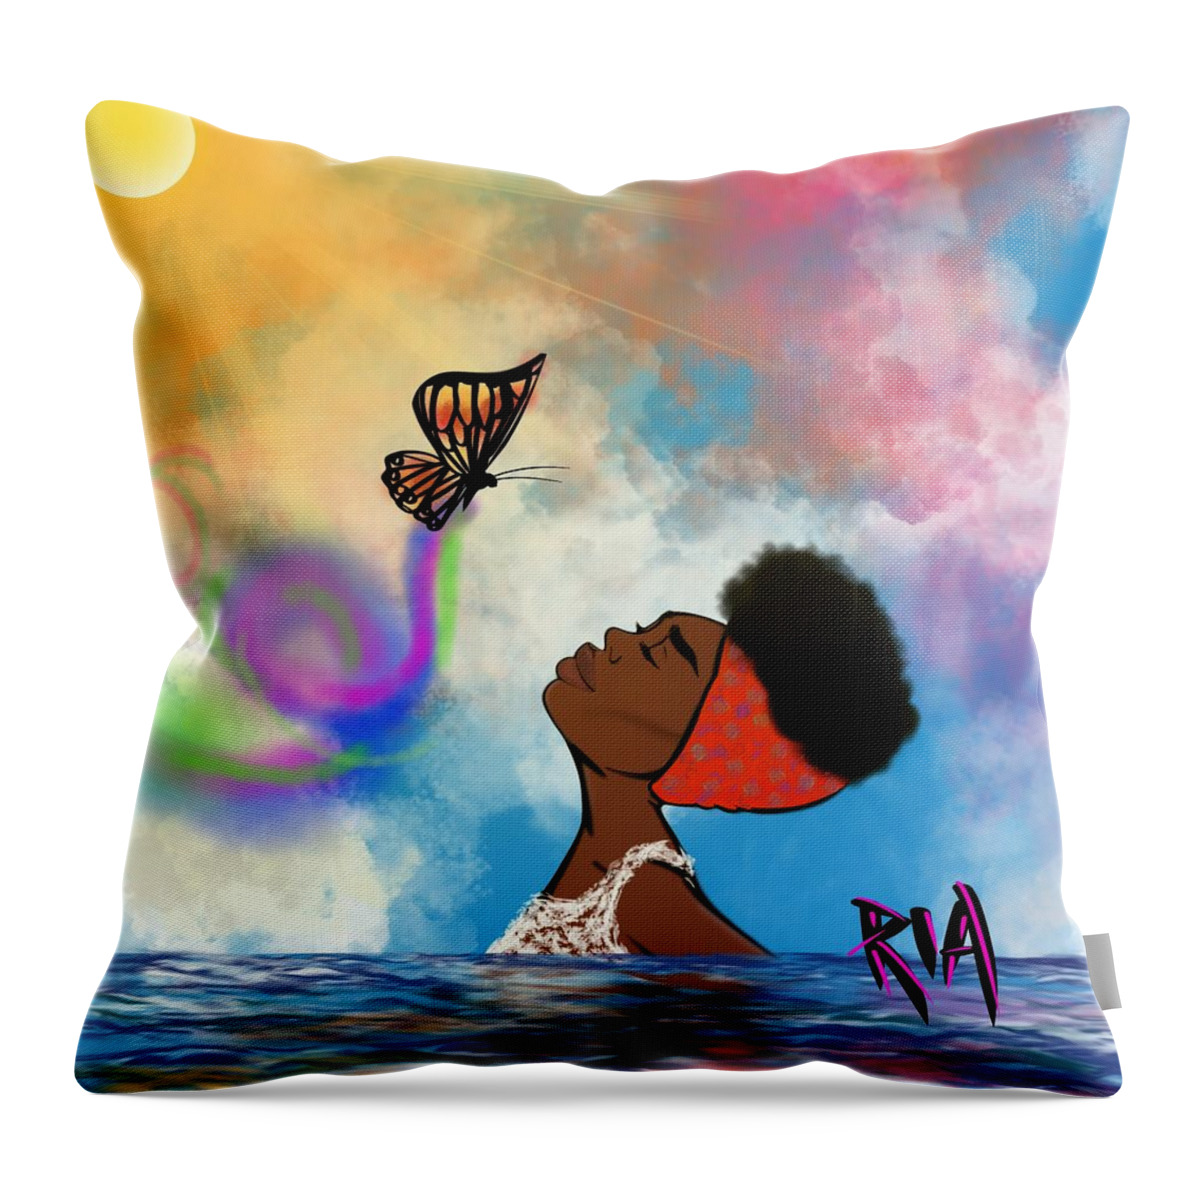 Baptism Throw Pillow featuring the painting Strip off the old personality by Artist RiA